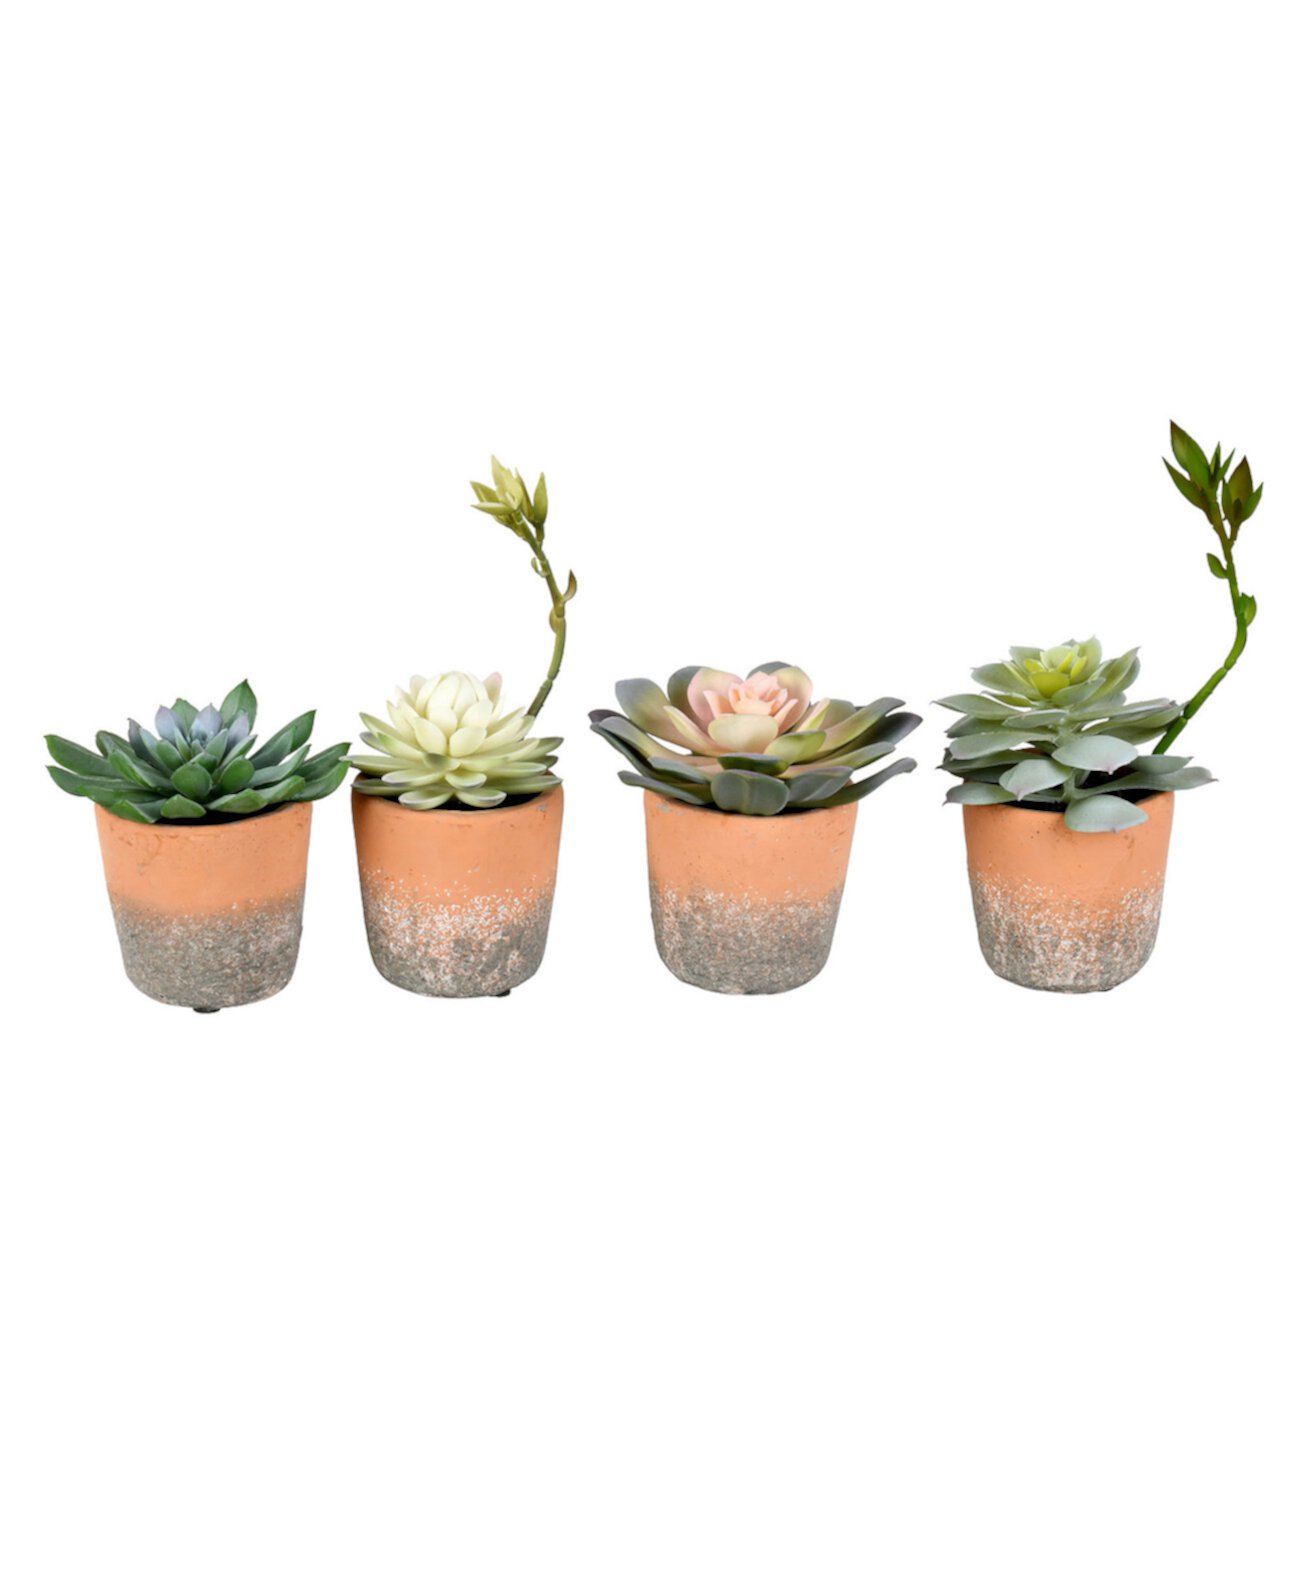 Set of 4 Assorted 7" Artificial Potted Succulents, Set of 4 Vickerman